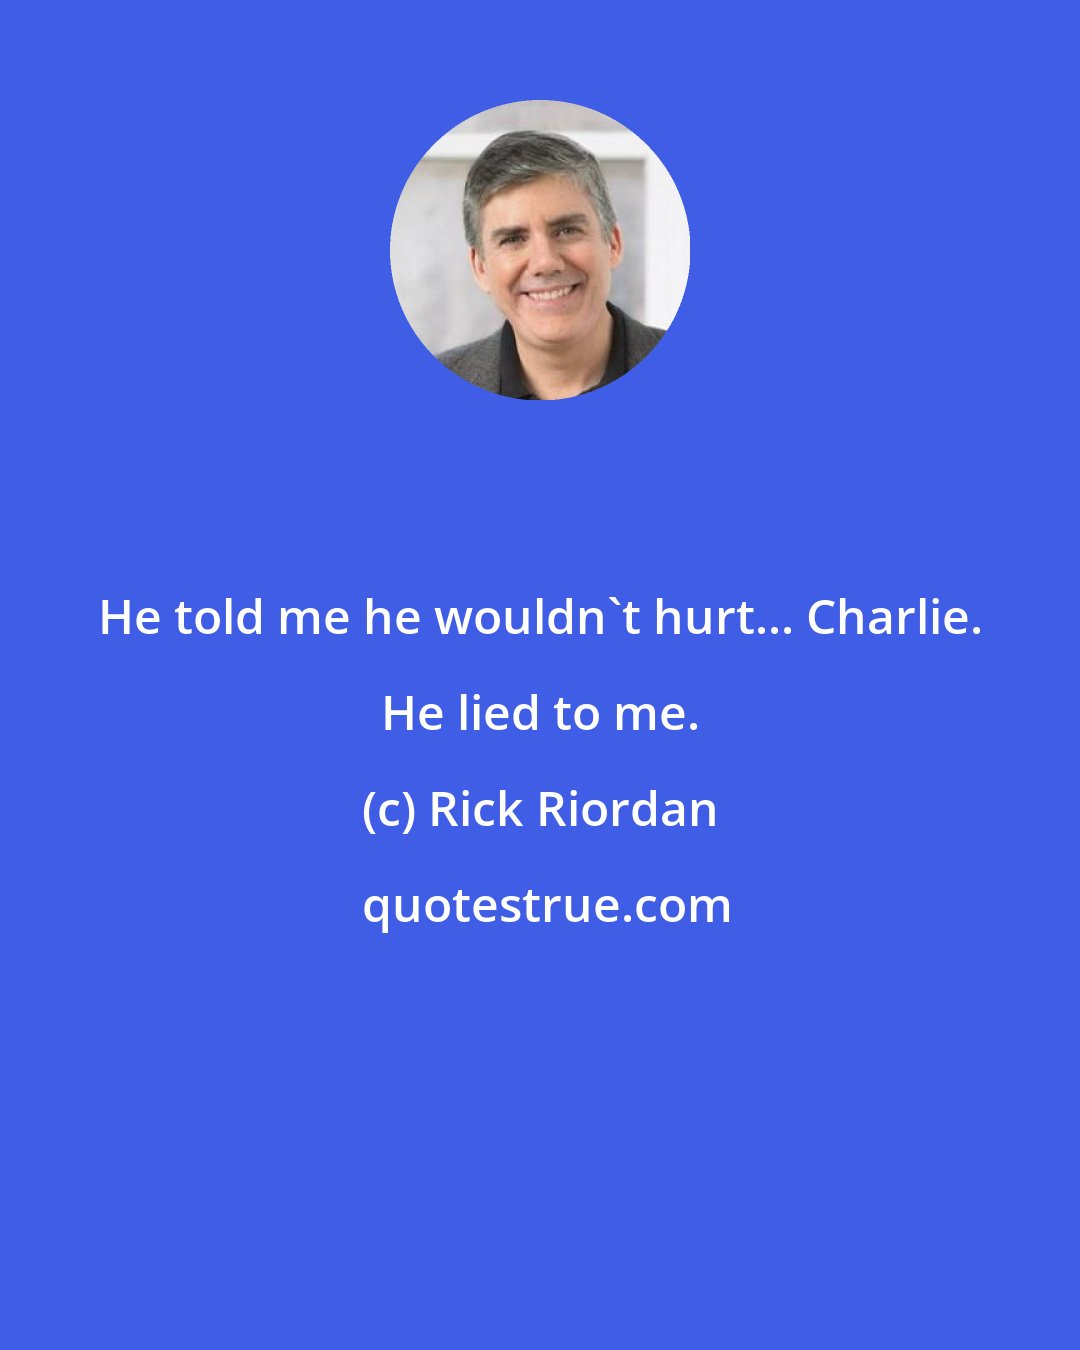 Rick Riordan: He told me he wouldn't hurt... Charlie. He lied to me.